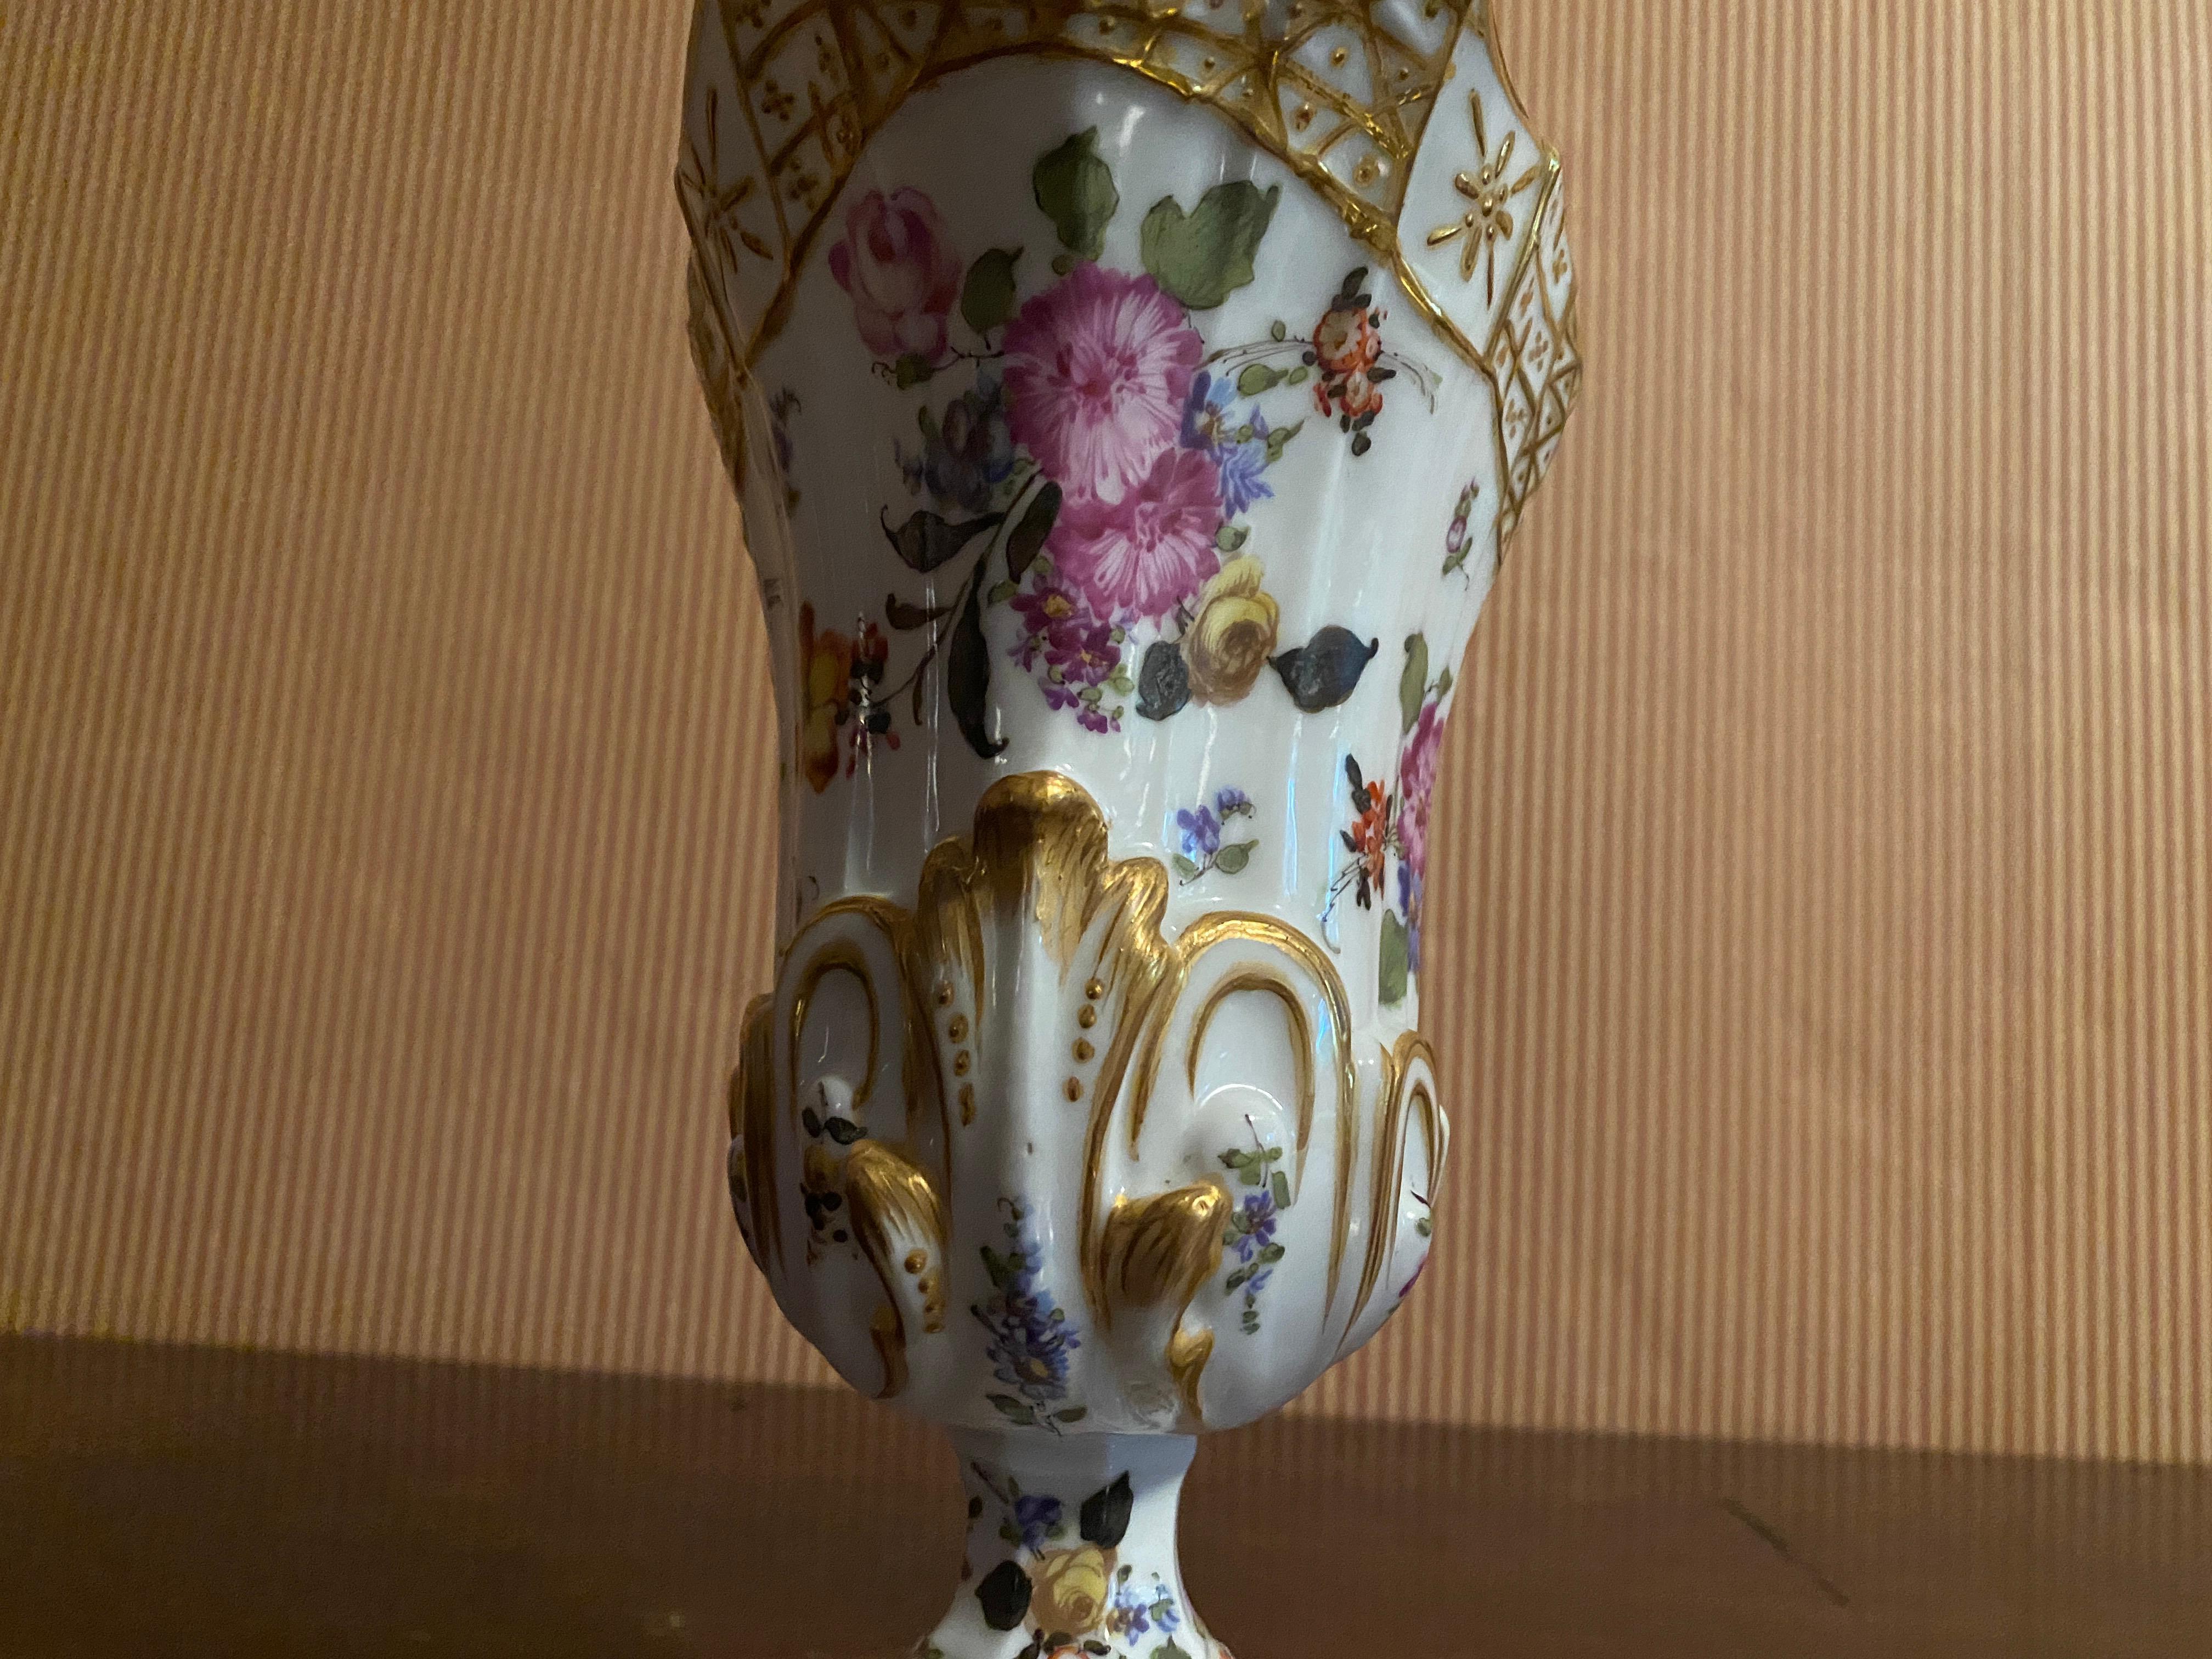 19th Cent. Choisy-le-Roy Ewer, in the Manner of Meissen, 